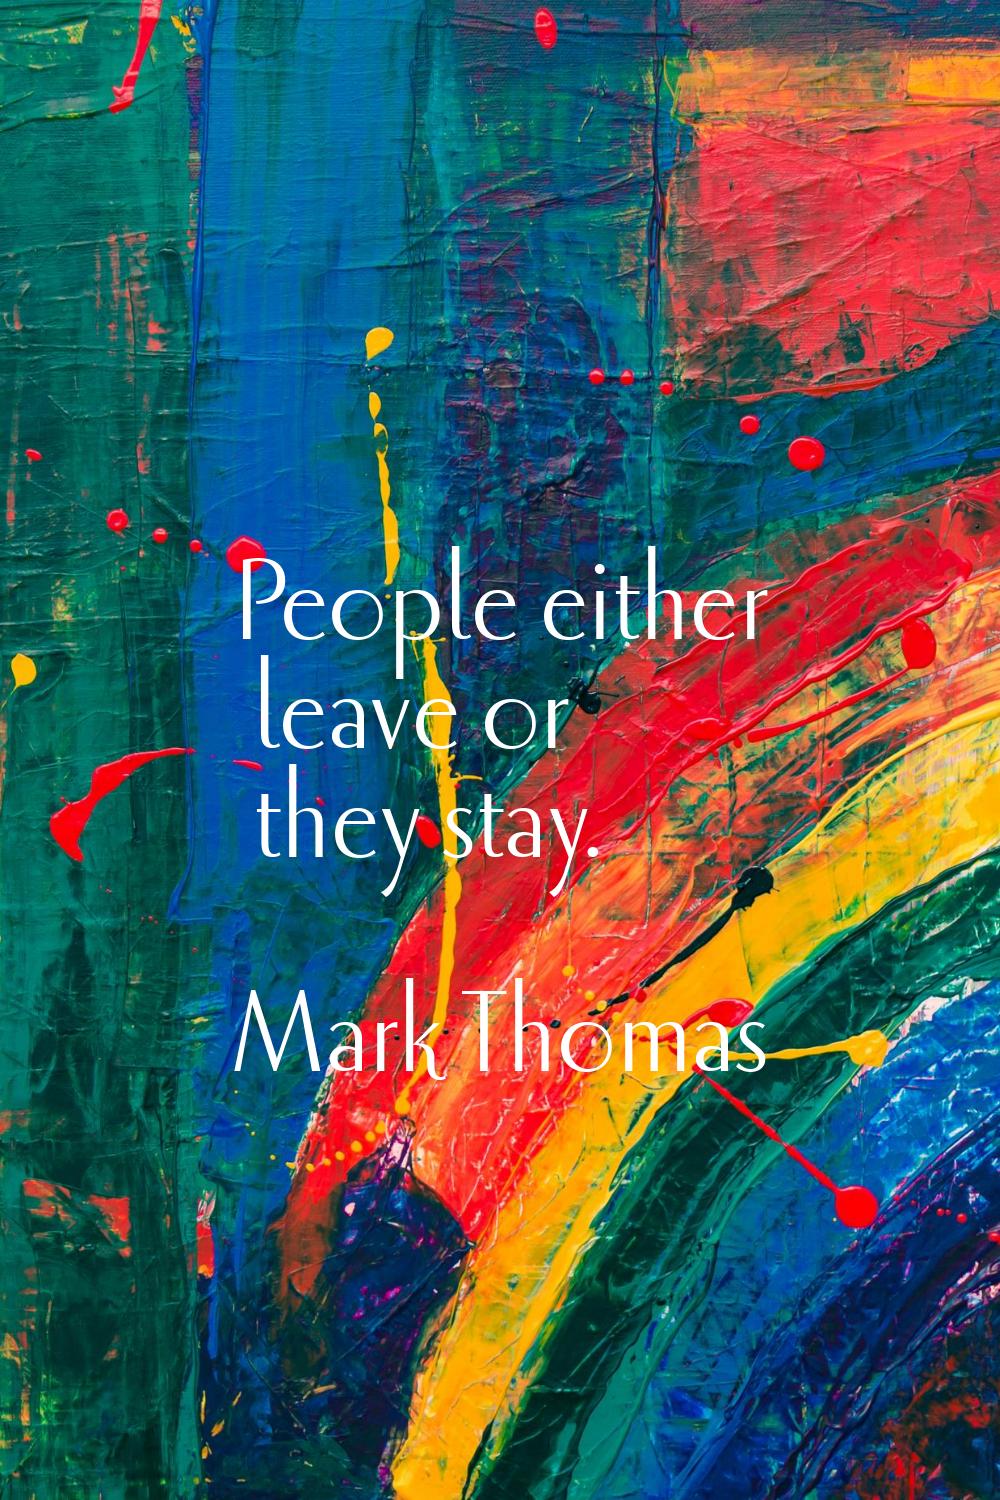 People either leave or they stay.